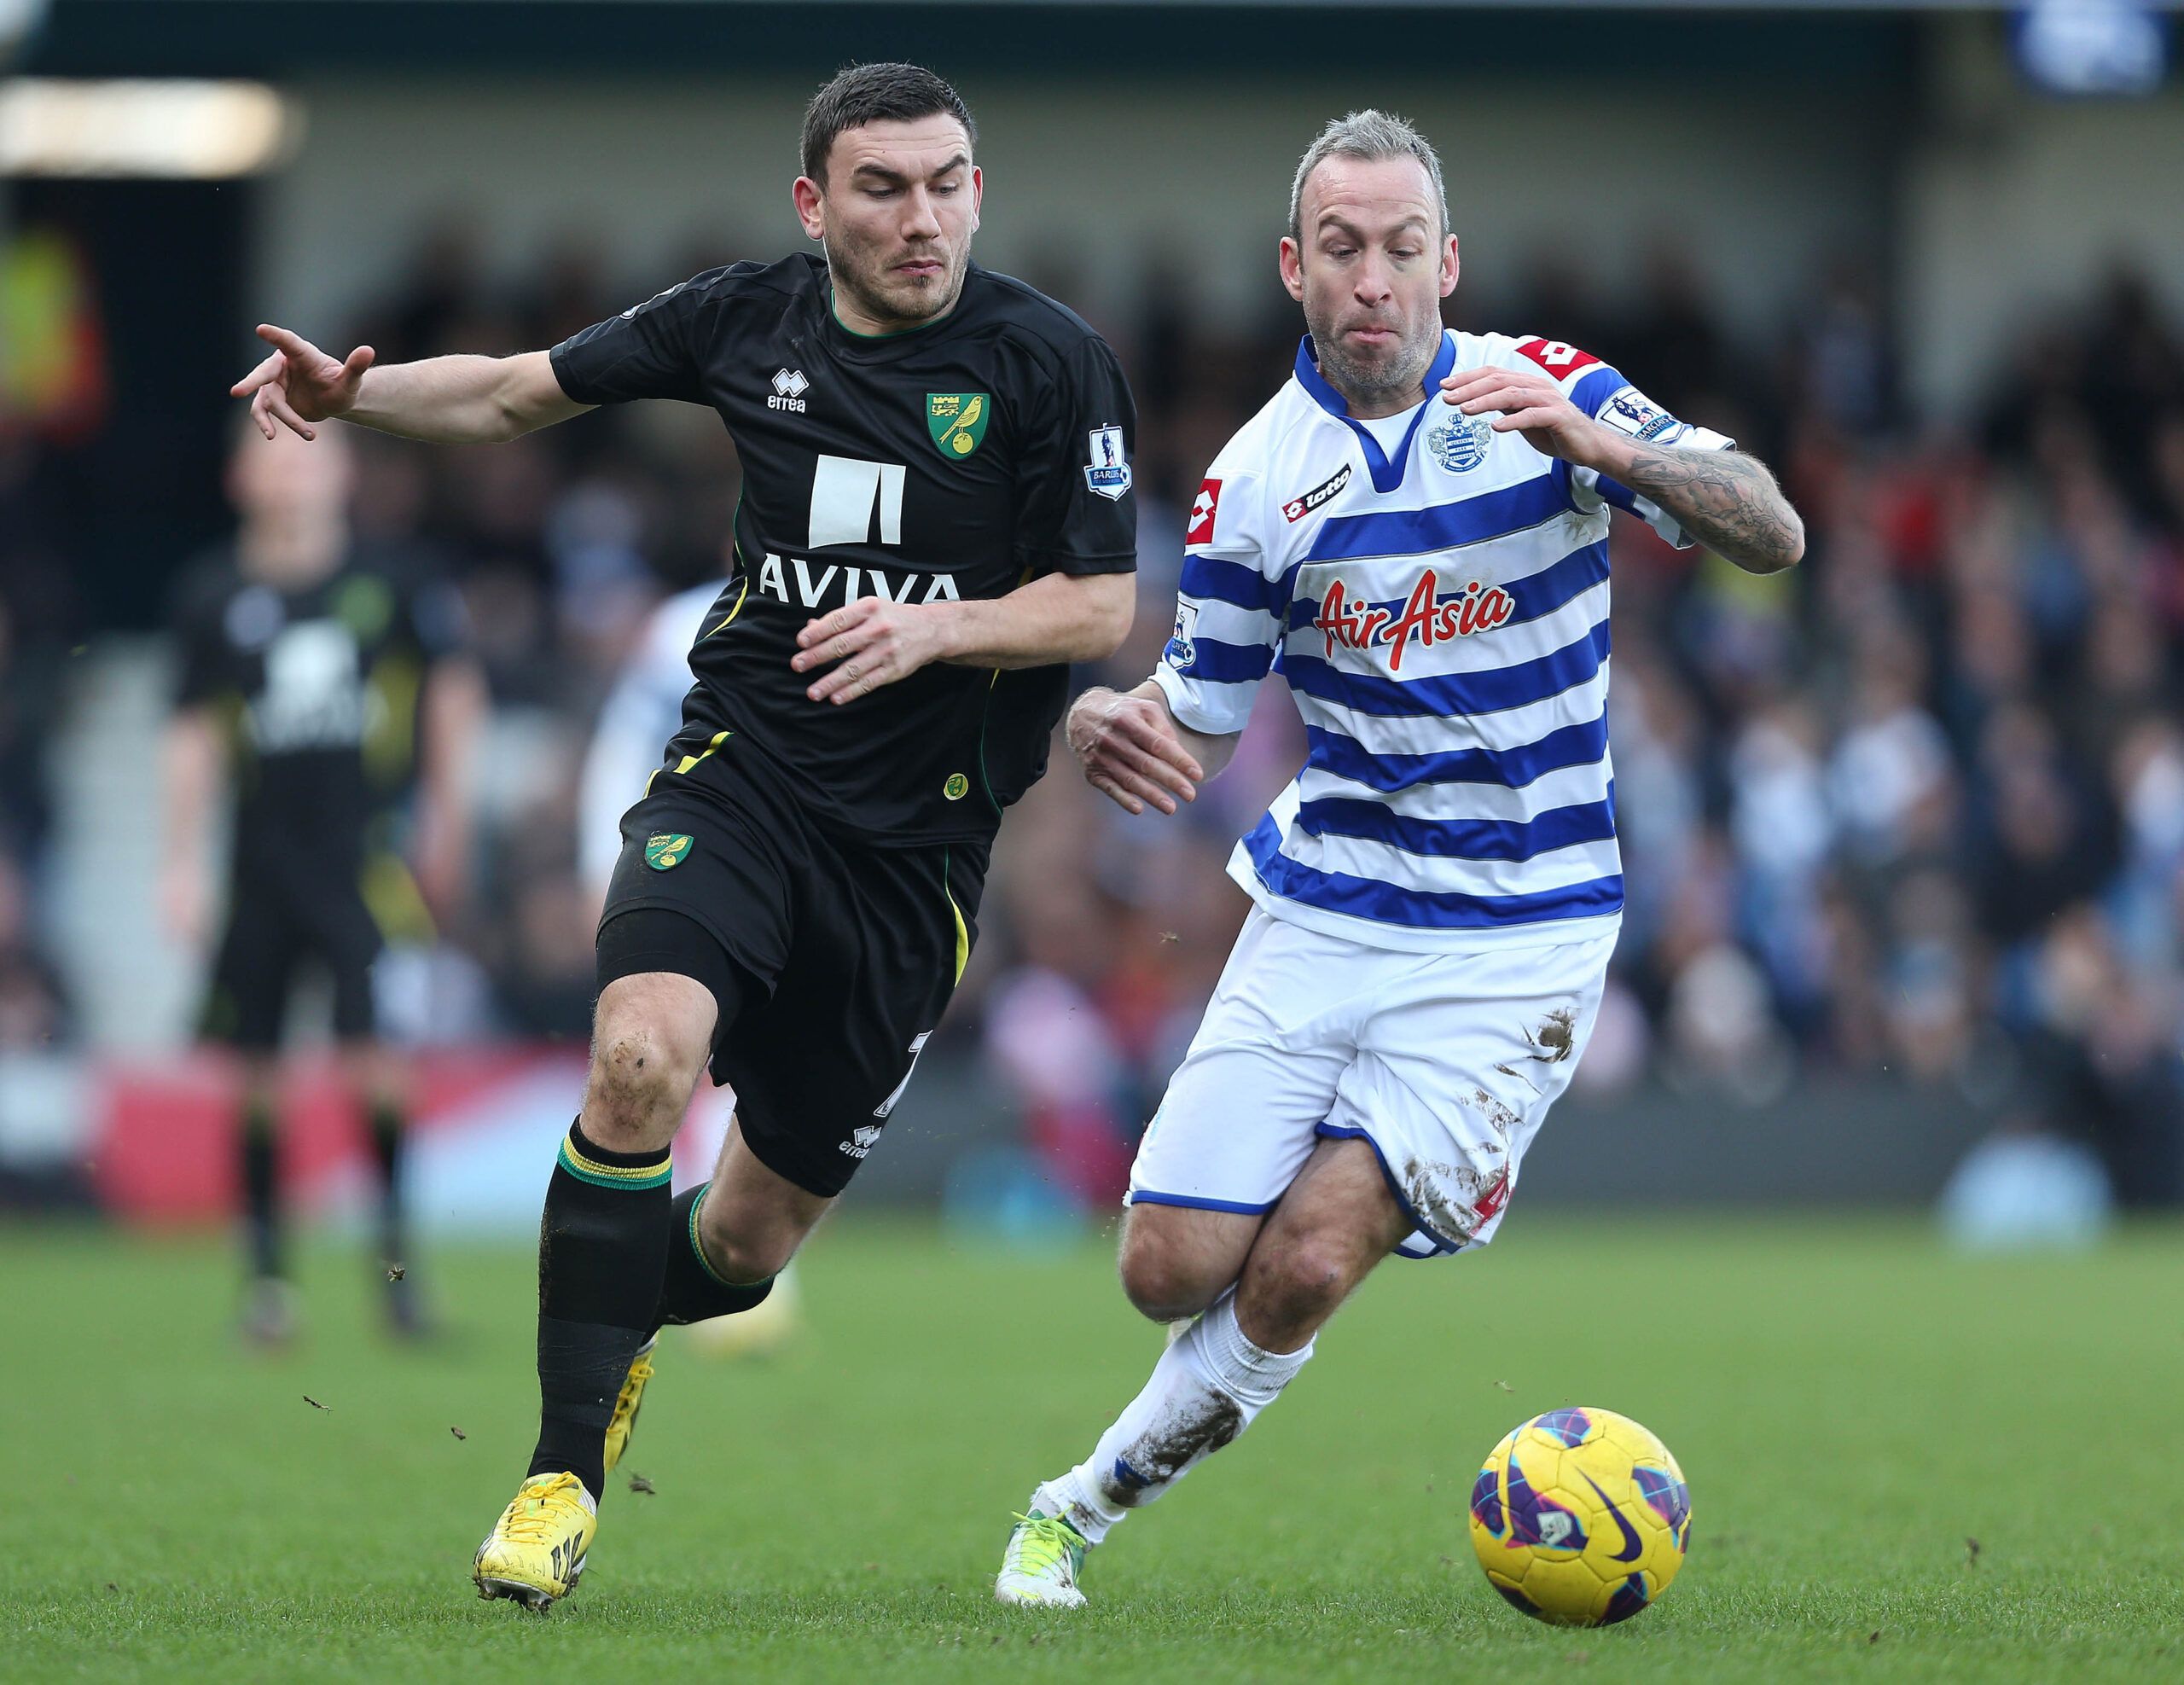 Football - Queens Park Rangers v Norwich City - Barclays Premier League  - Loftus Road - 2/2/13 
QPR's Shaun Derry (R) and Norwich's Robert Snodgrass in action 
Mandatory Credit: Action Images / Matthew Childs 
Livepic 
EDITORIAL USE ONLY. No use with unauthorized audio, video, data, fixture lists, club/league logos or live services. Online in-match use limited to 45 images, no video emulation. No use in betting, games or single club/league/player publications.  Please contact your account repre